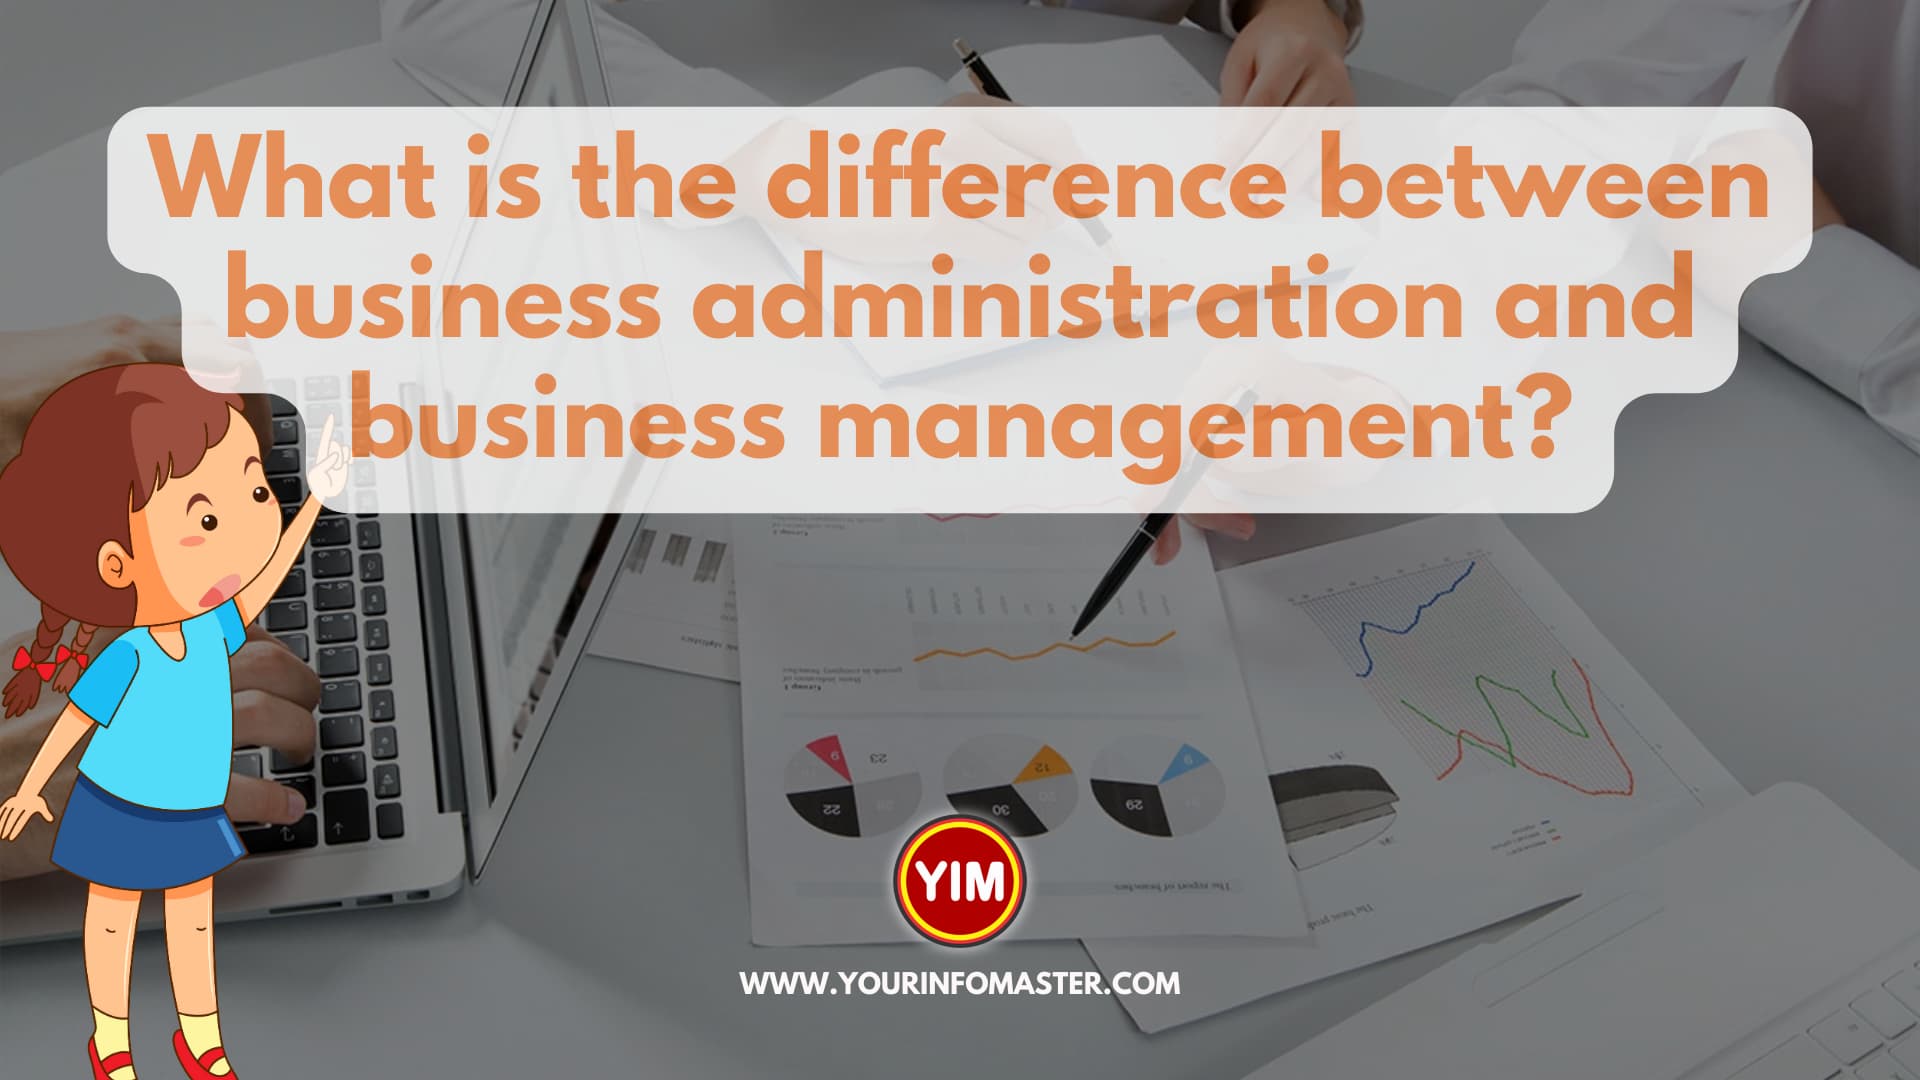 What is the difference between business administration and business management